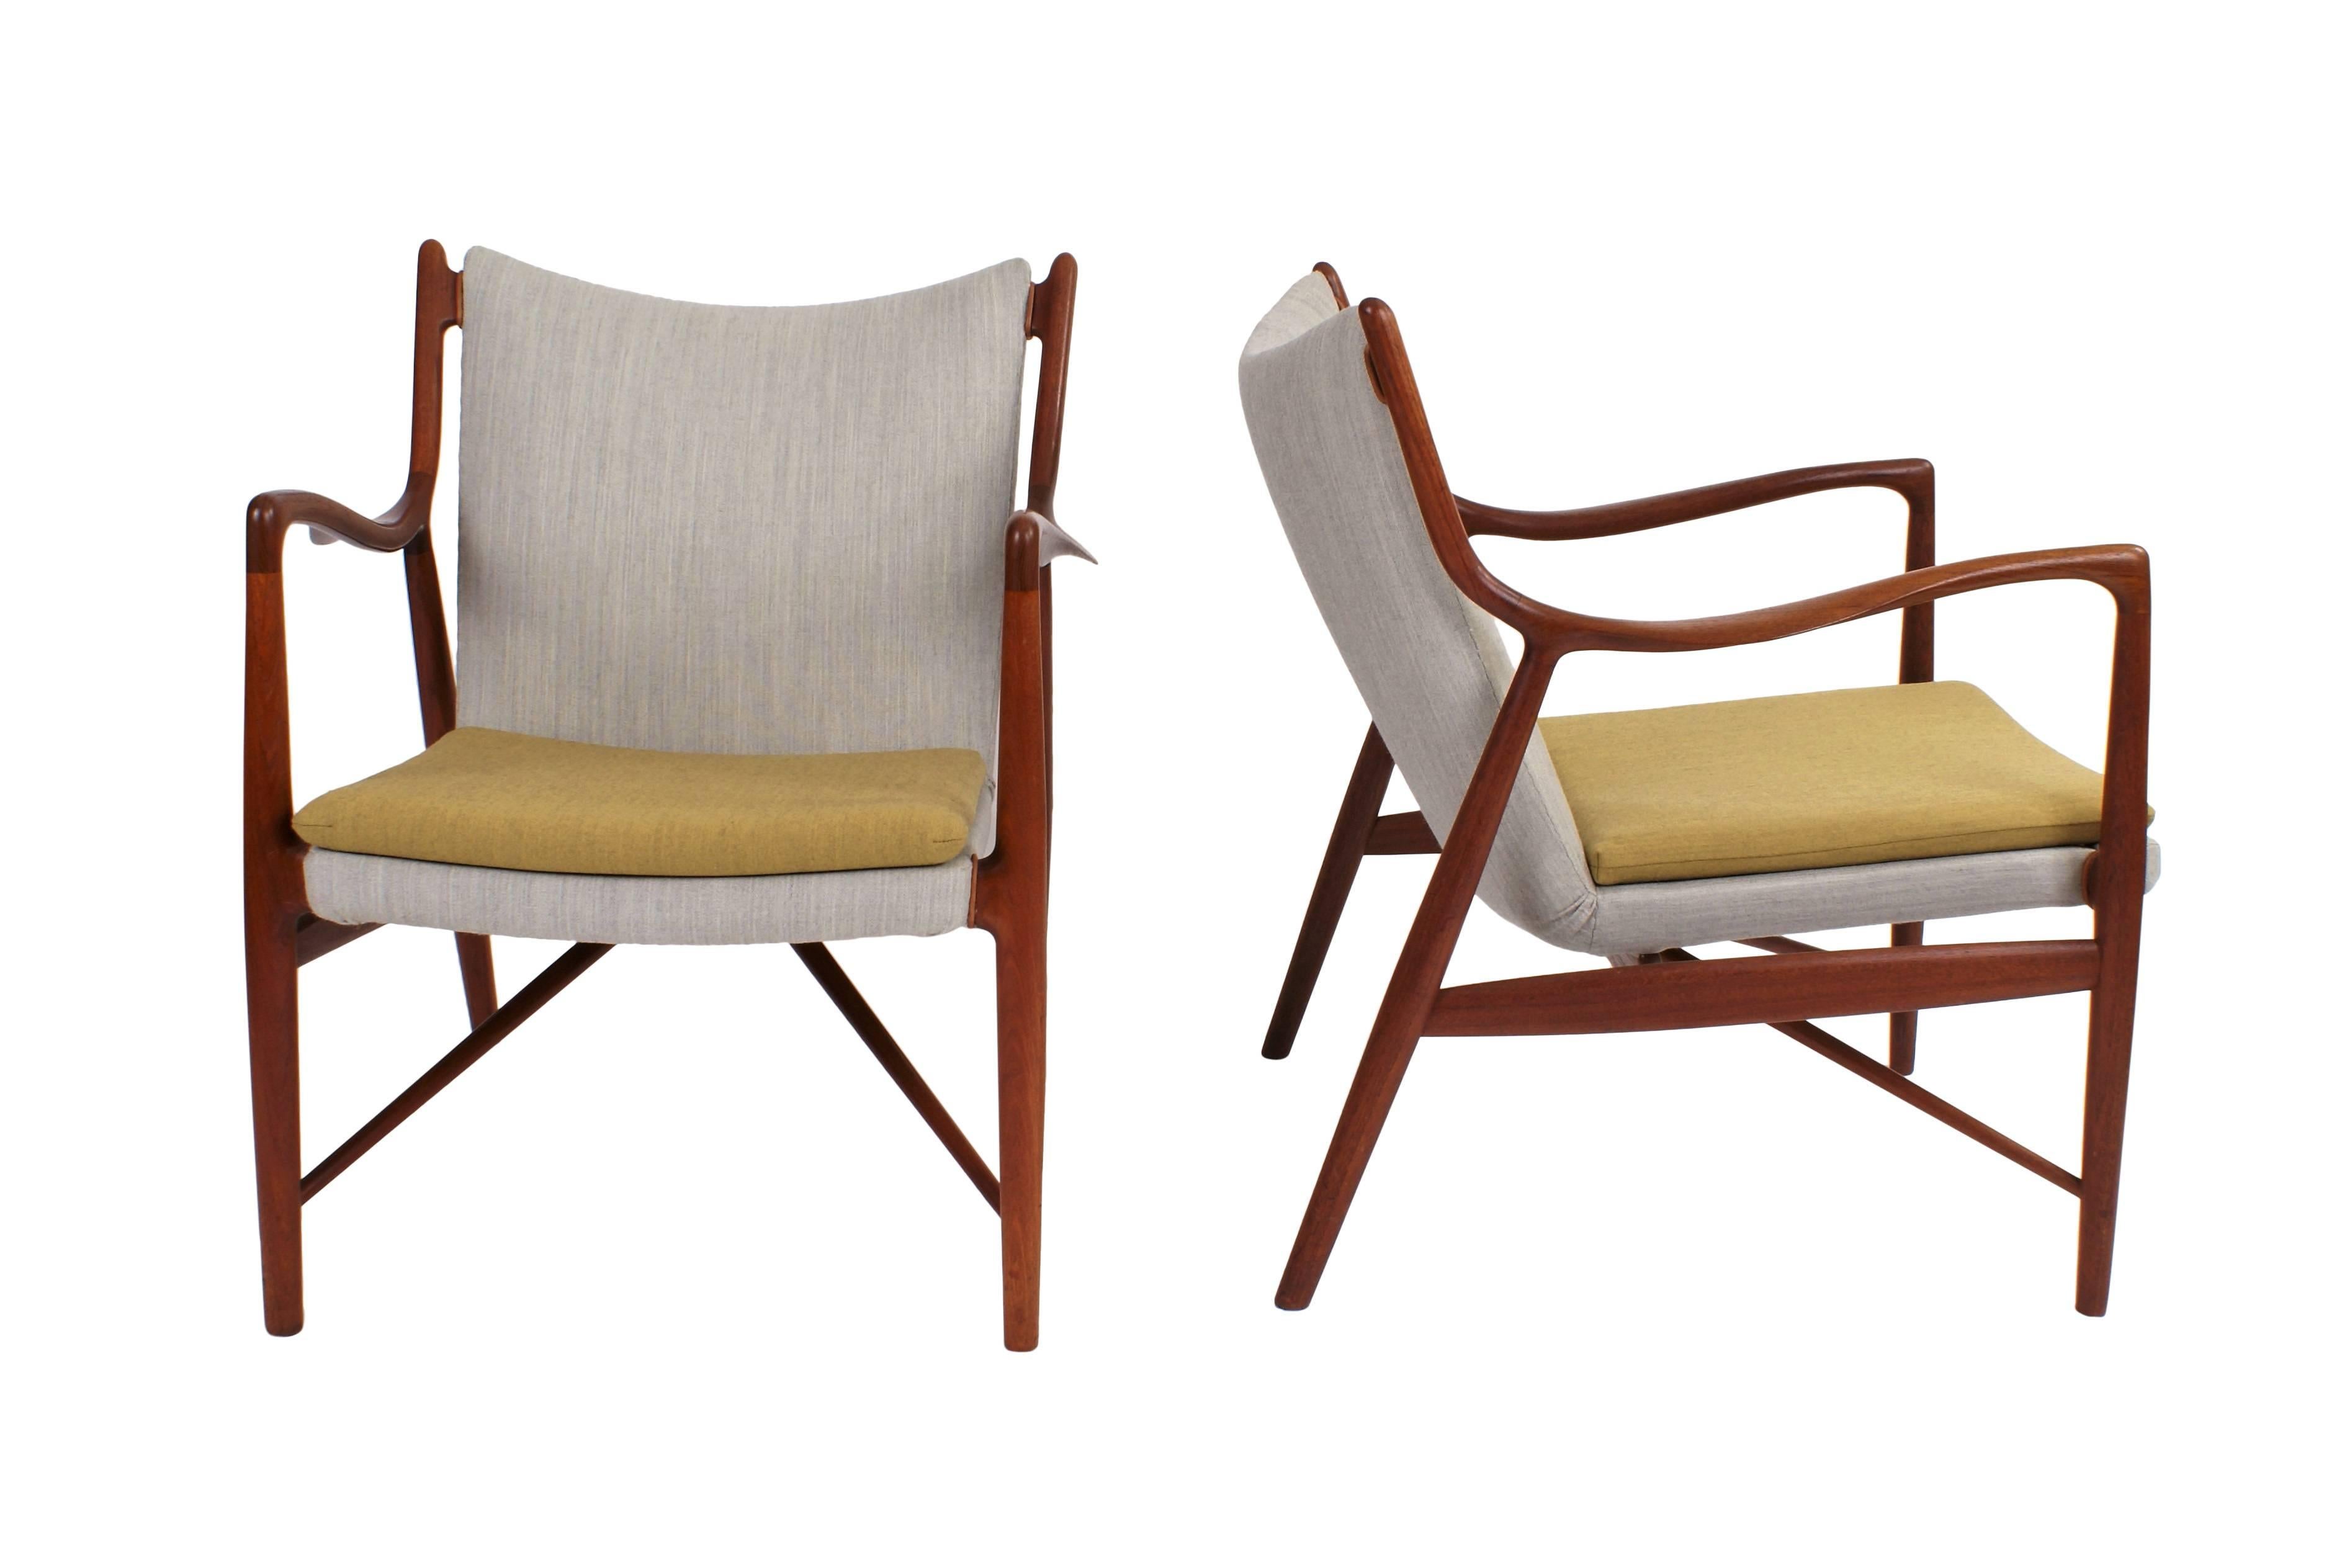 Pair of Finn Juhl NV45 chairs in teak made and stamped from master cabinetmaker Niels Vodder. Designed, 1945.

The chairs are re-upholstered in fabric. Underside of each armchair branded and impressed with 'CABINETMAKER Niels Vodder/COPENHAGEN